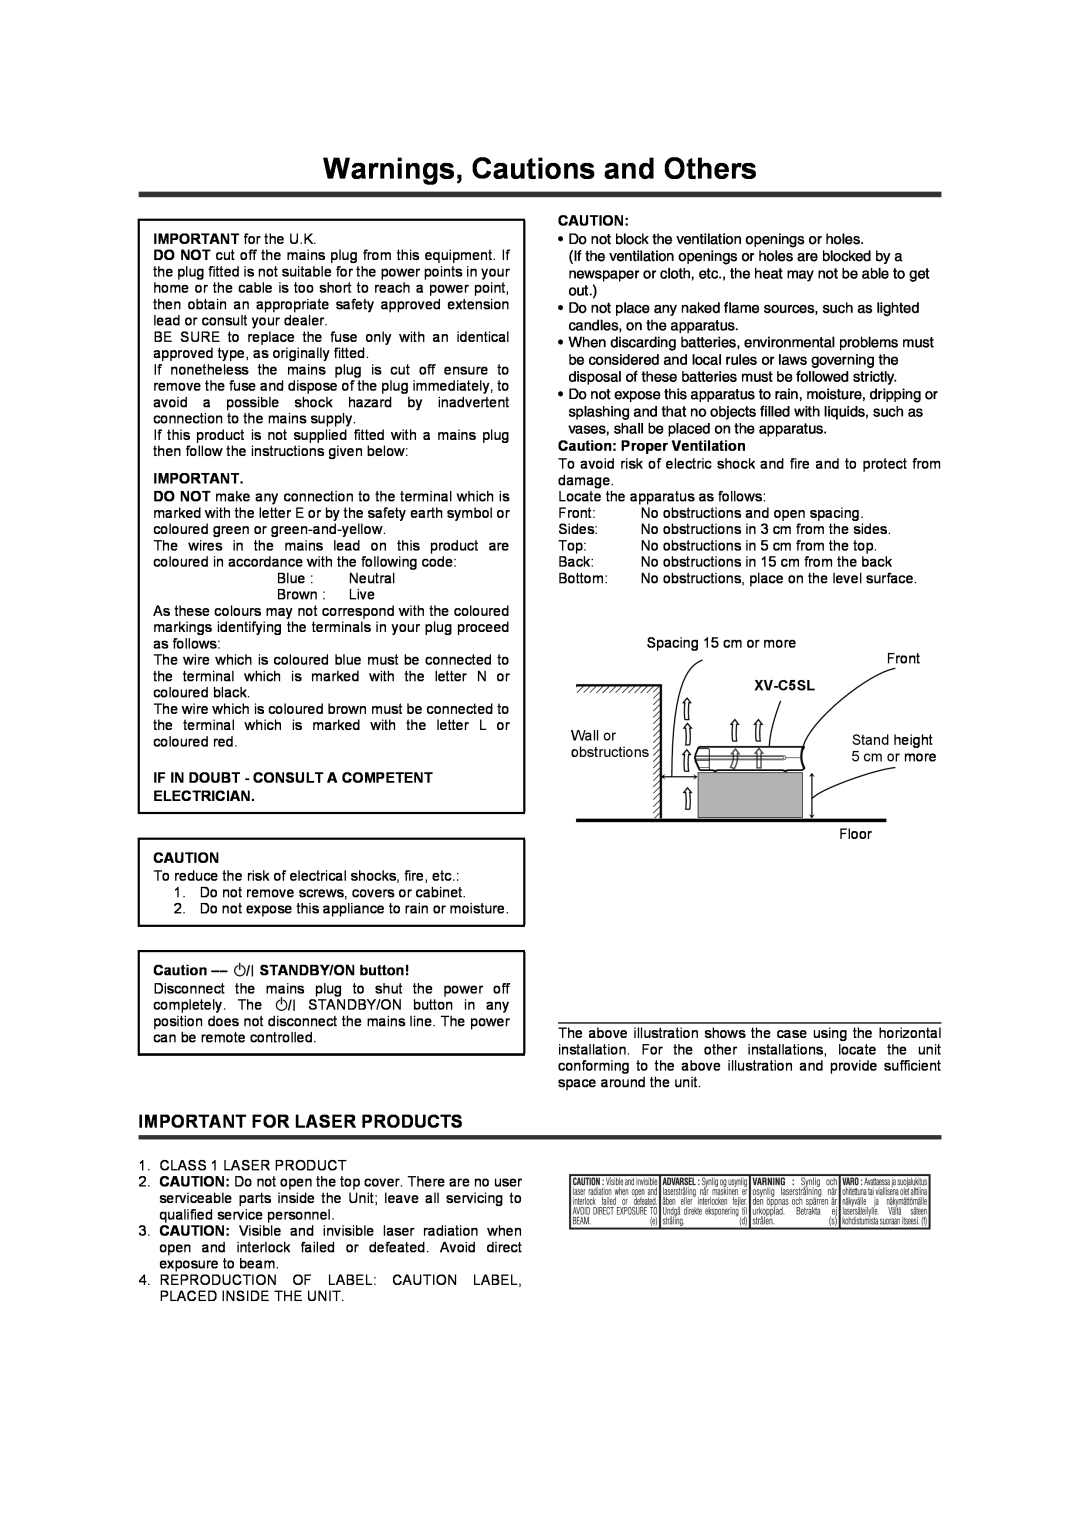 JVC LET0227-003A manual Warnings, Cautions and Others, Important For Laser Products 